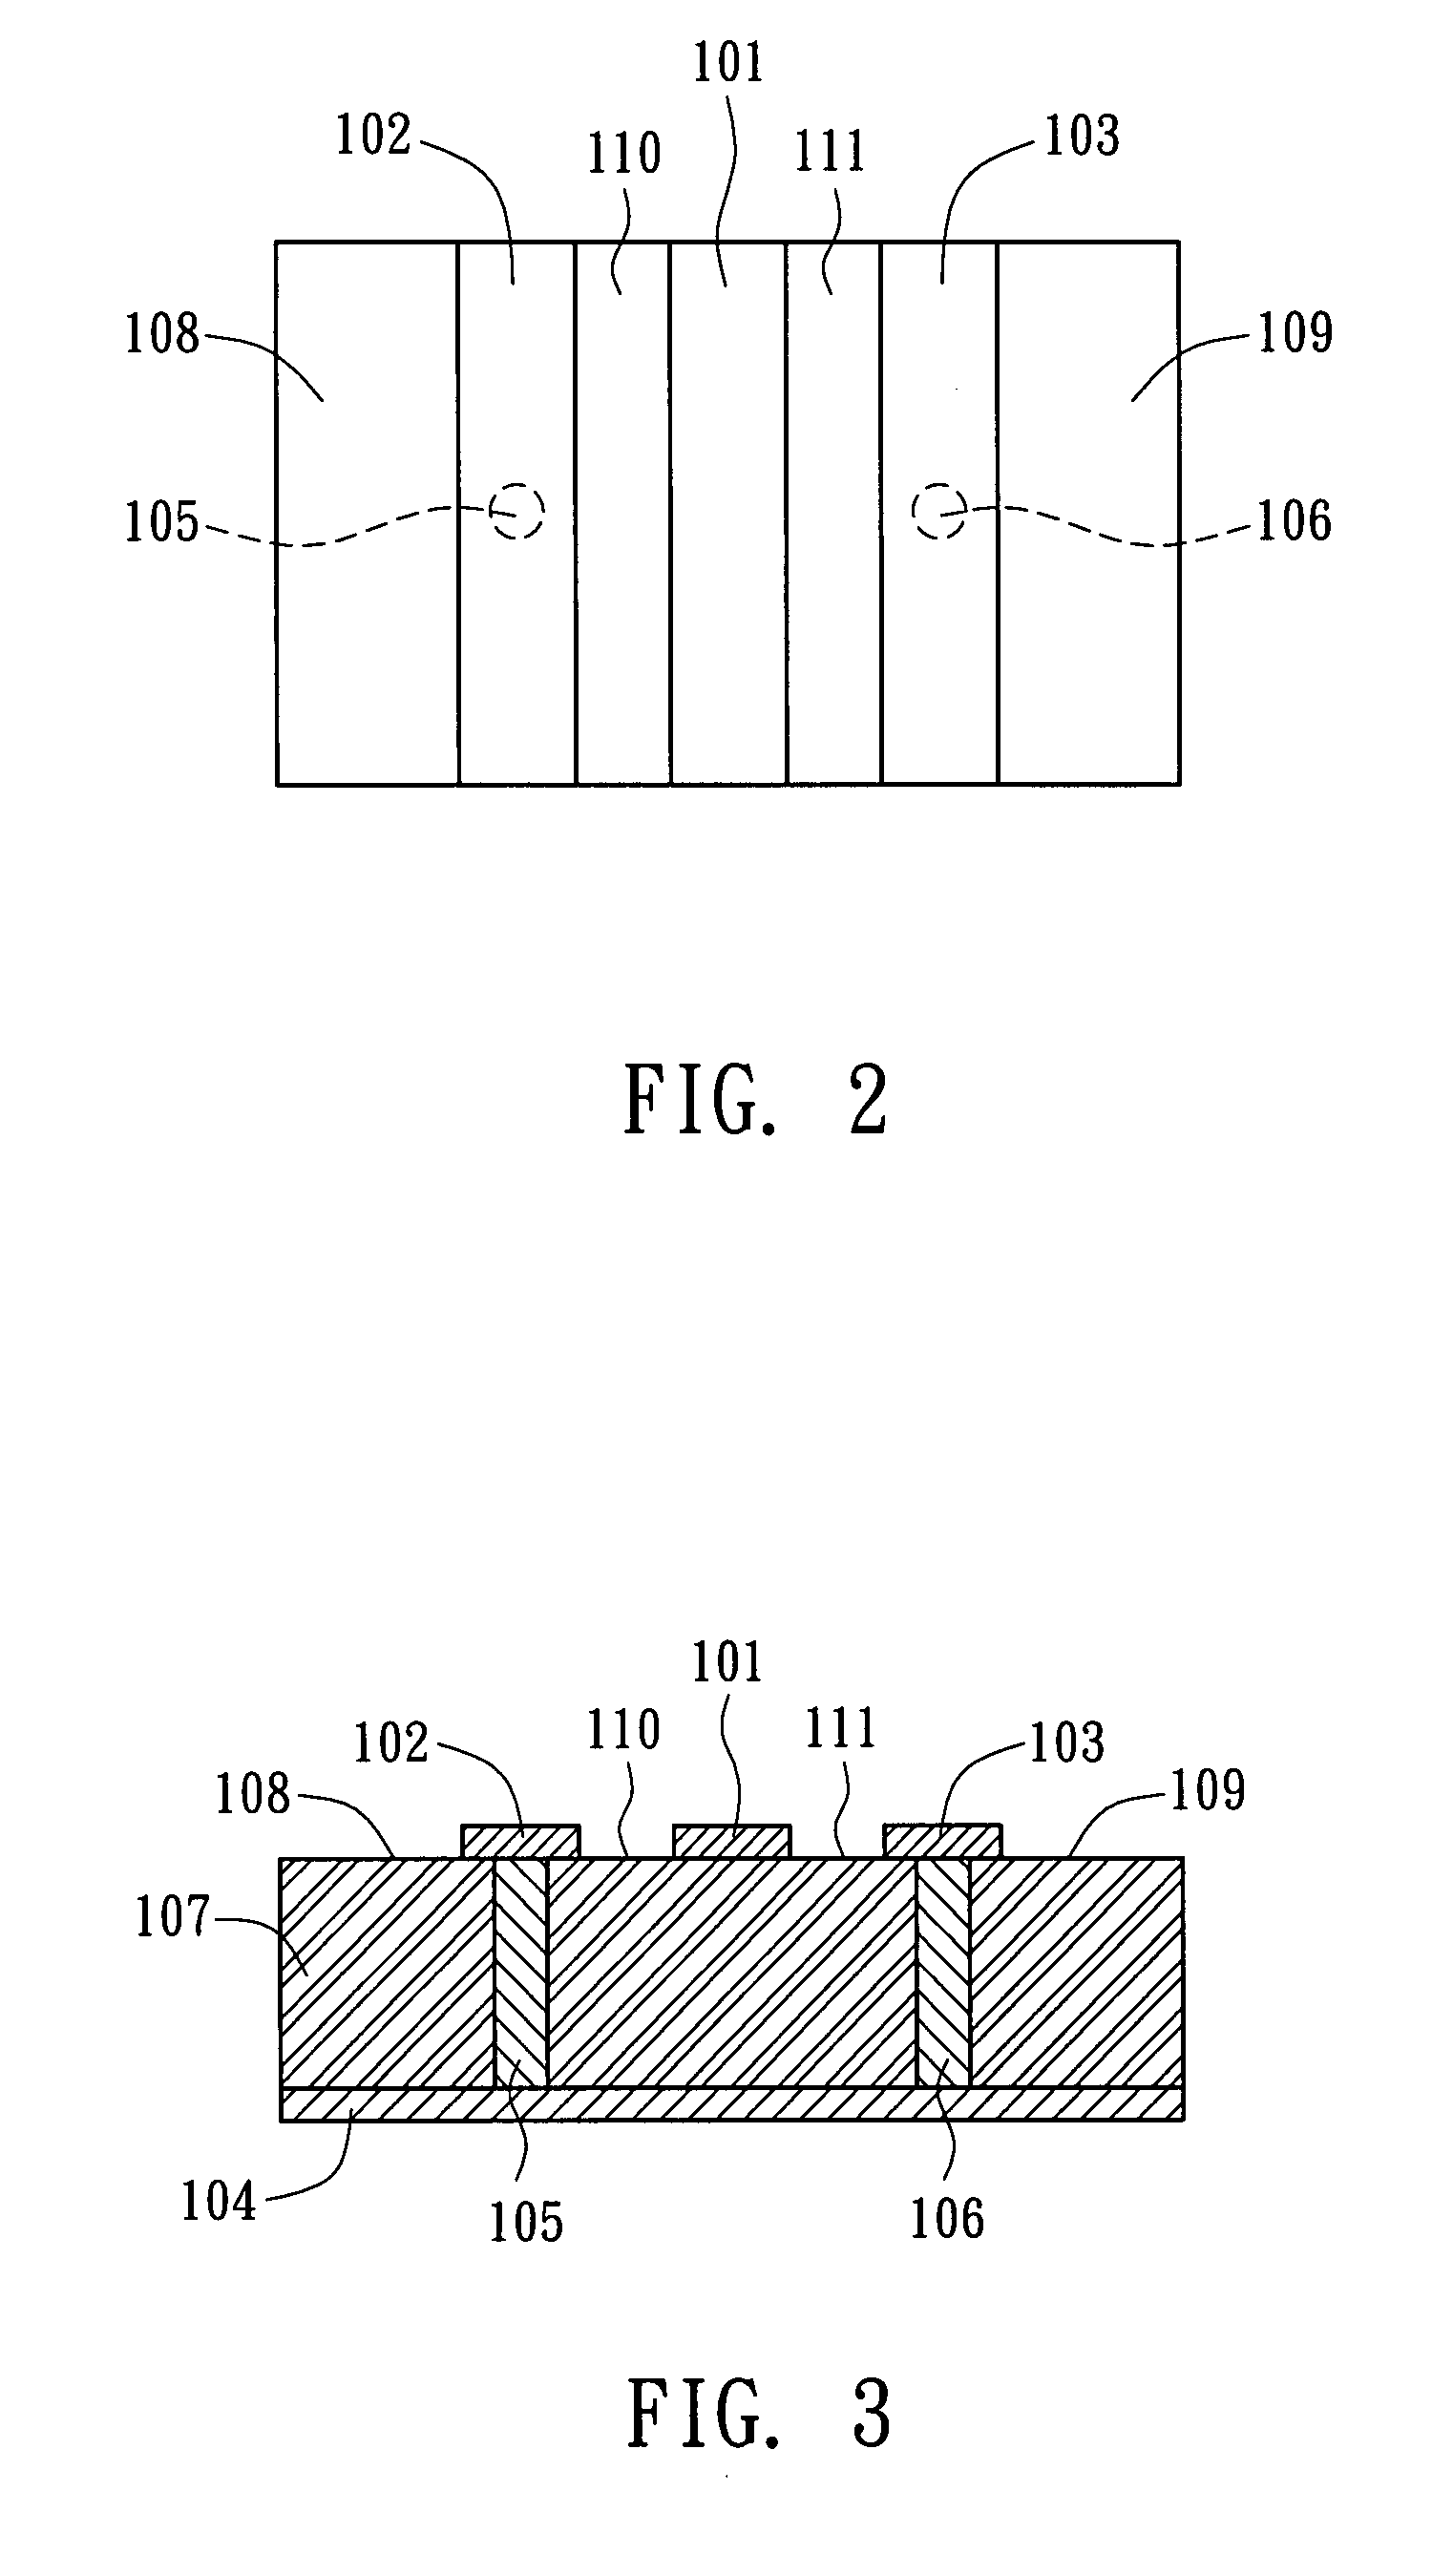 Methods for designing switchable and tunable broadband filters using finite-width conductor-backed coplanar waveguide structures